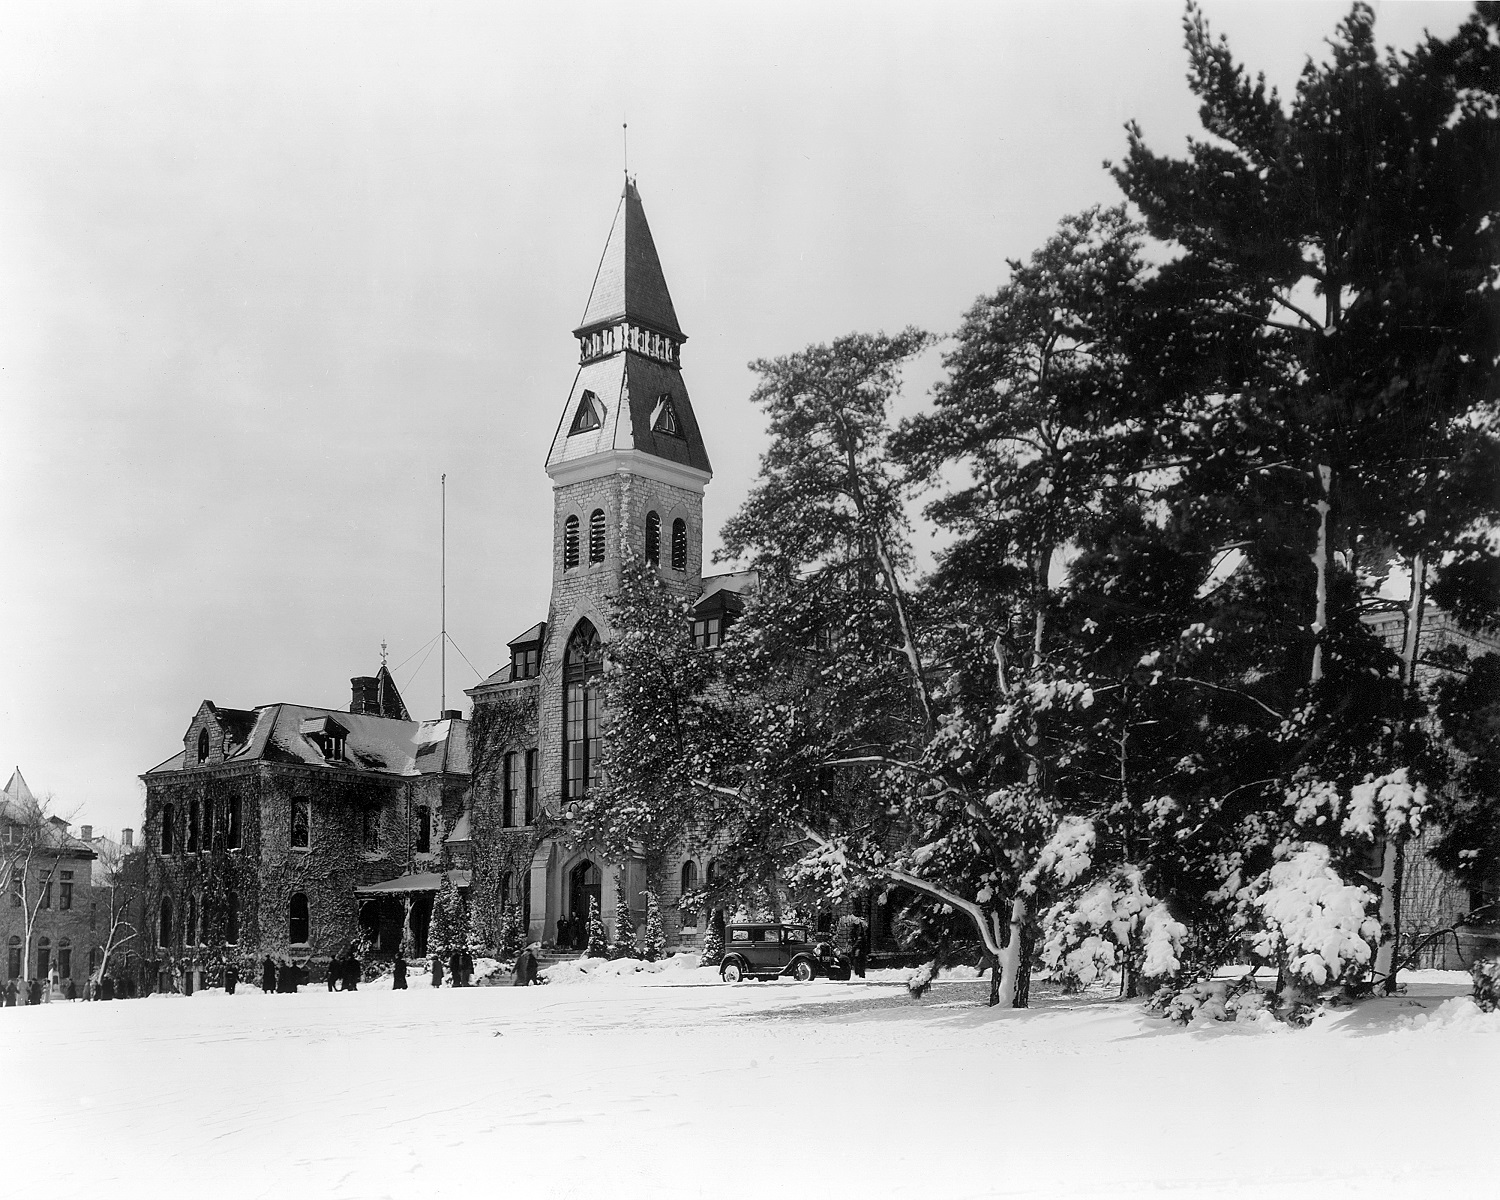 Anderson Hall in 1939